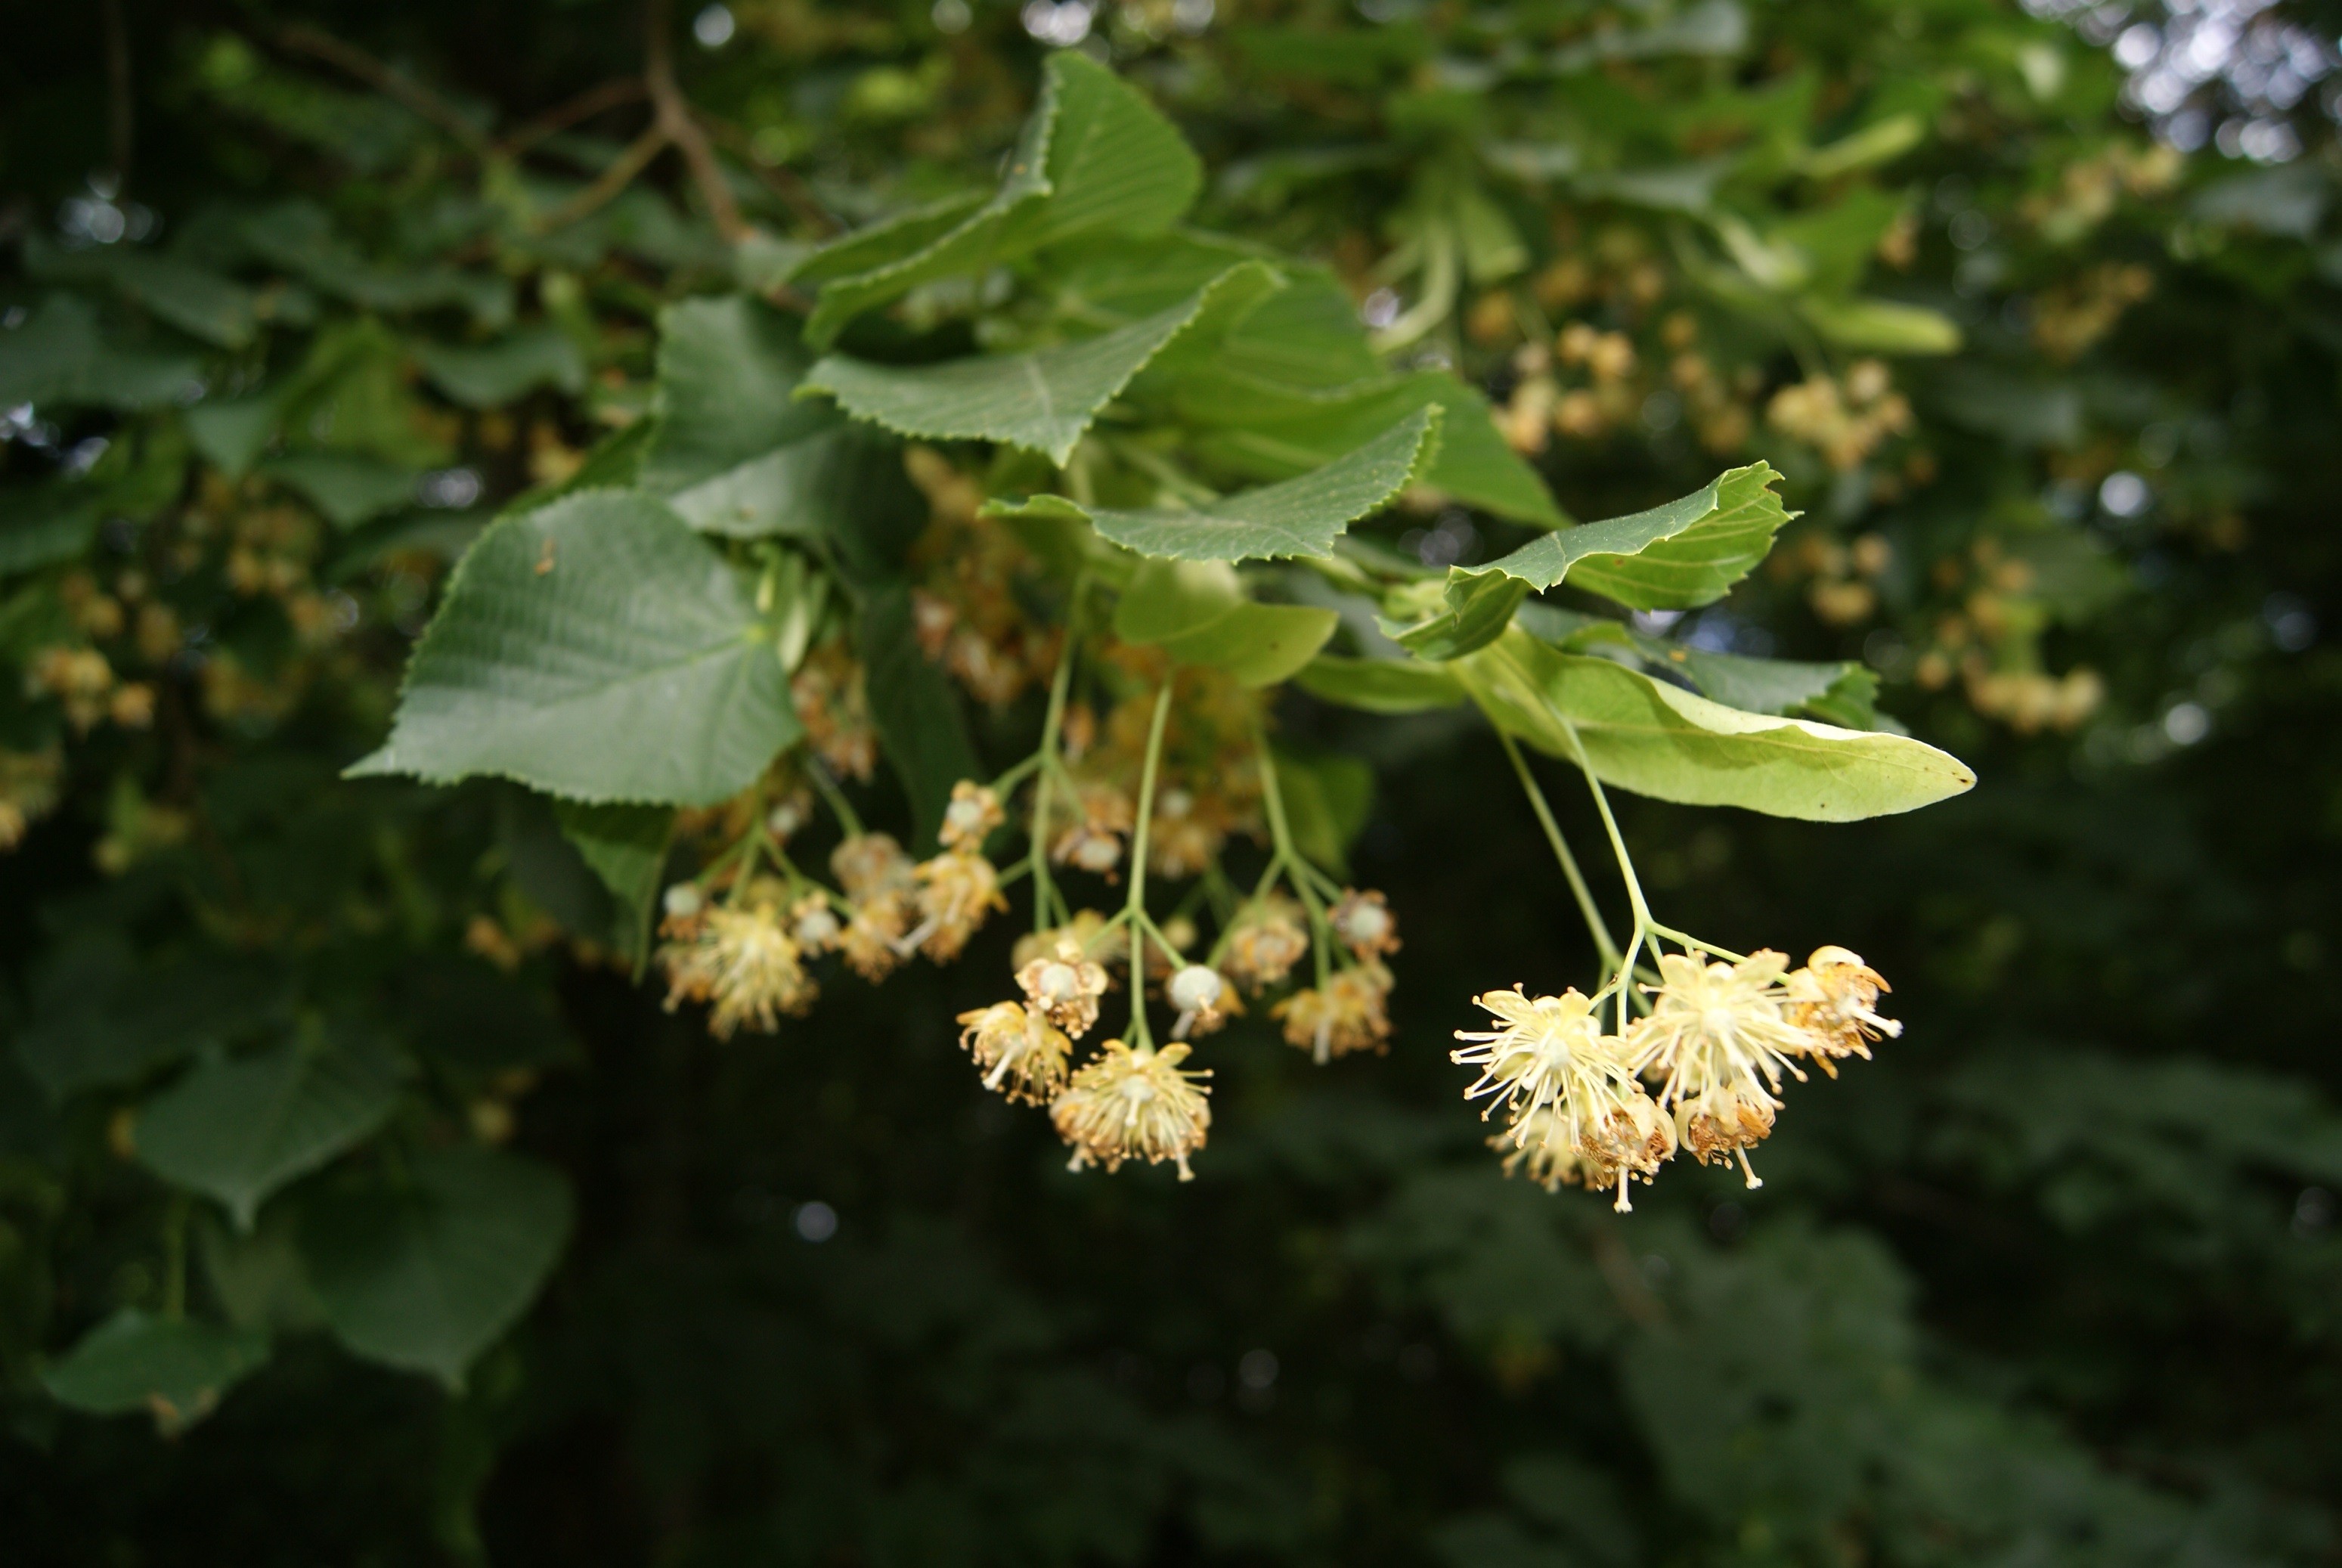 Small-leaved lime